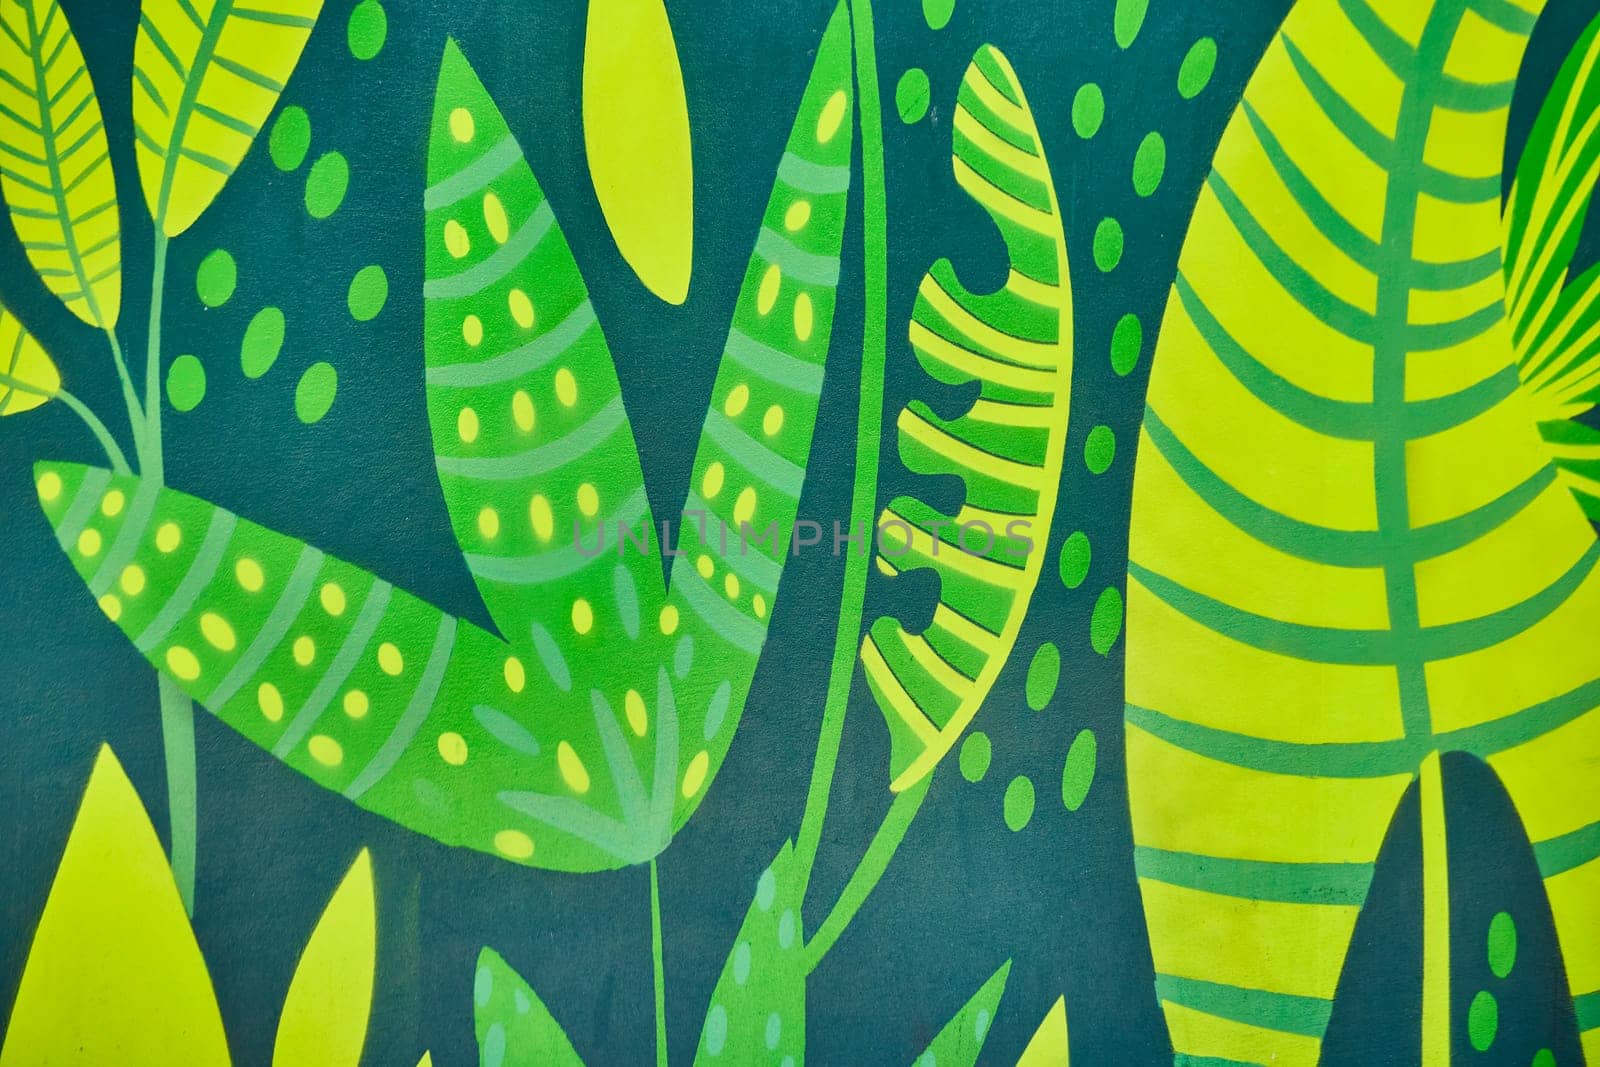 Vivid mural of intertwined tropical leaves in bold greens and yellows, capturing nature's artistry in Fort Wayne.